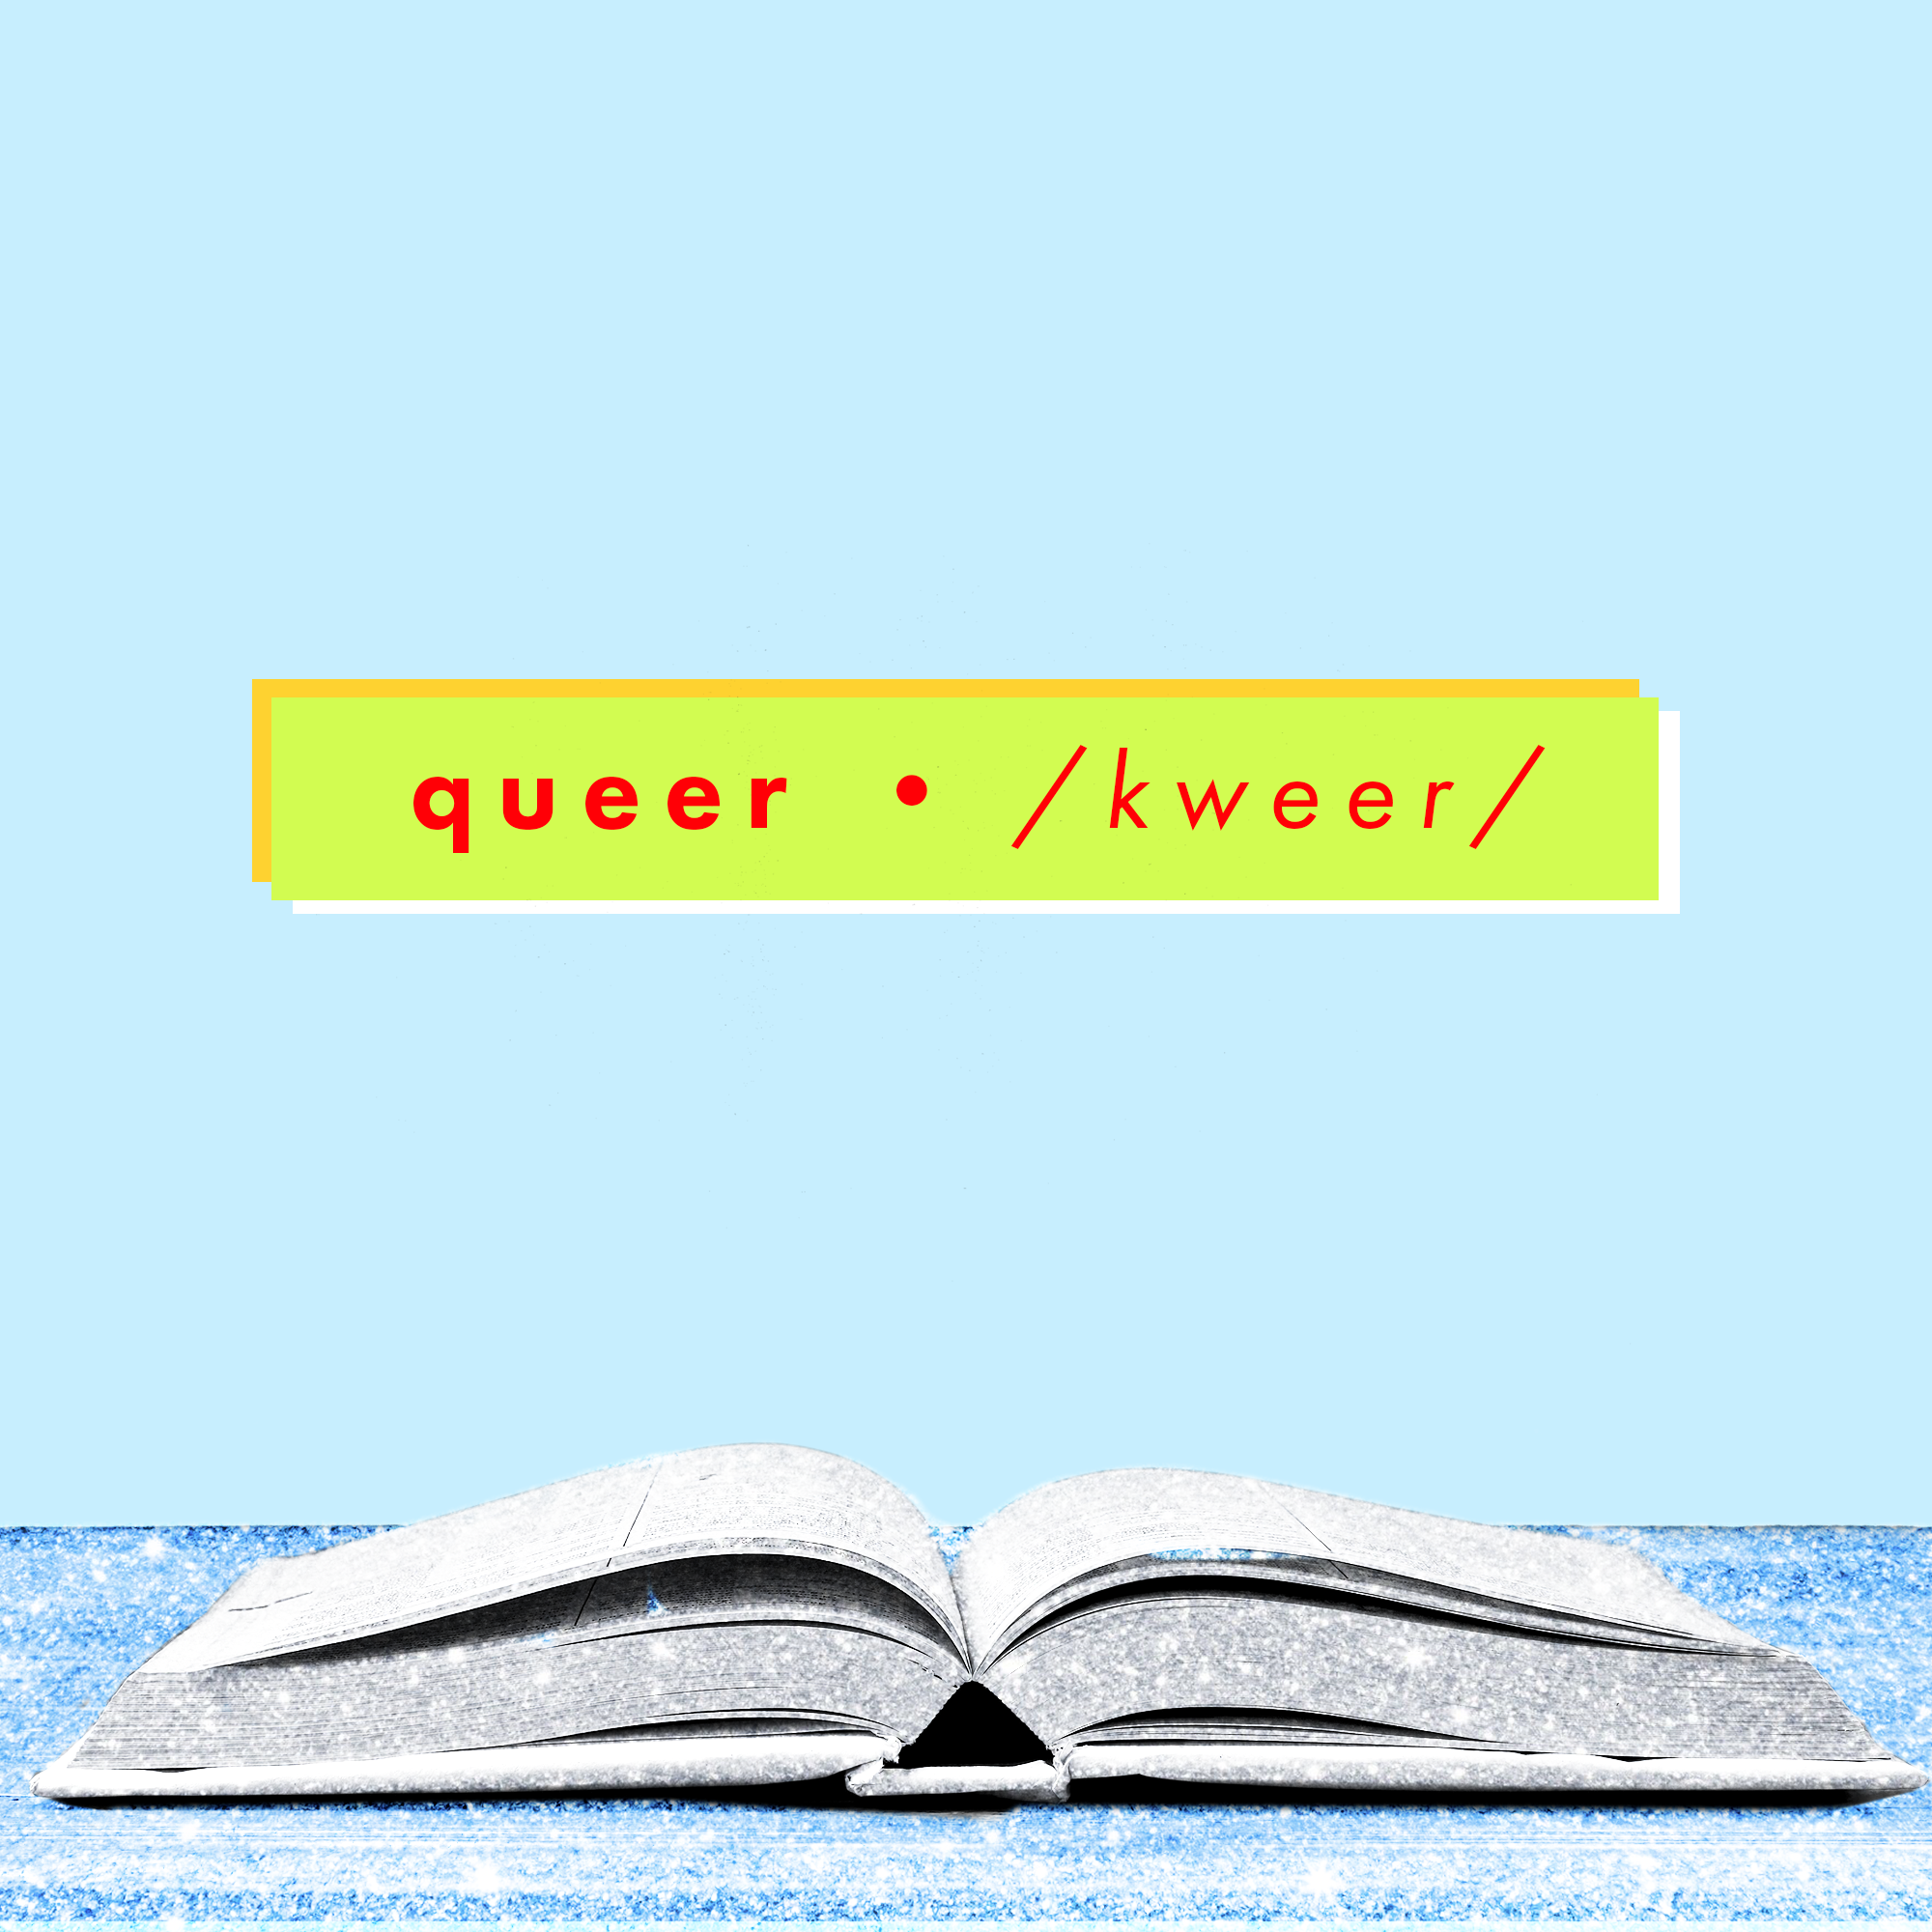 Queer Definition What Is The Meaning Of Queer Queer Vs Gay